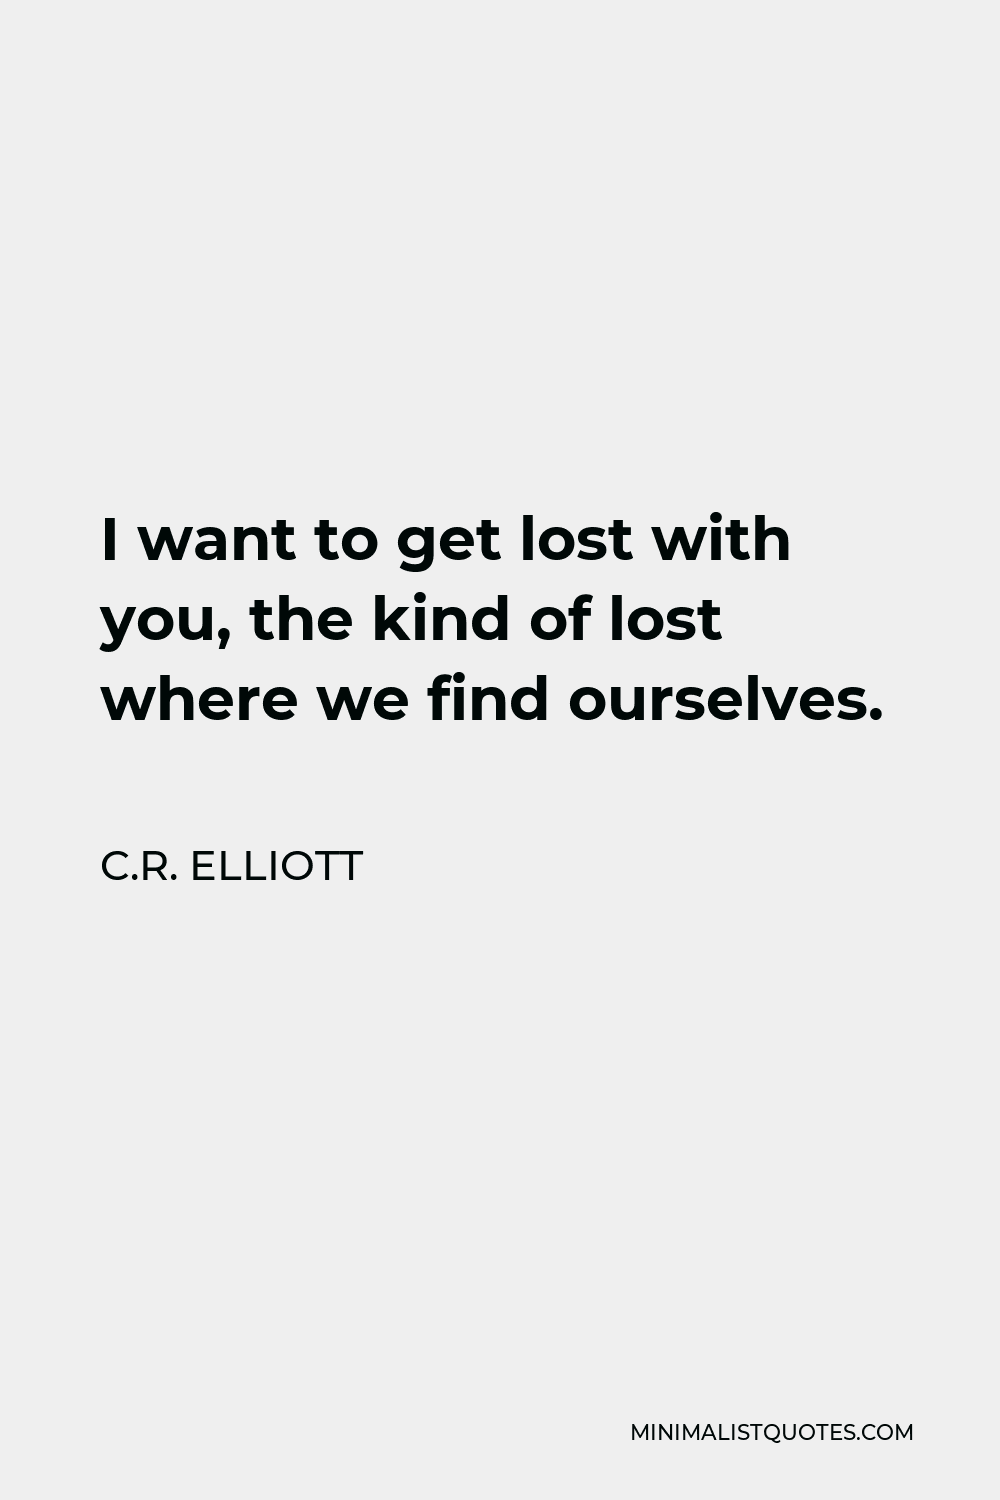 C.R. Elliott Quote - I want to get lost with you, the kind of lost where we find ourselves.